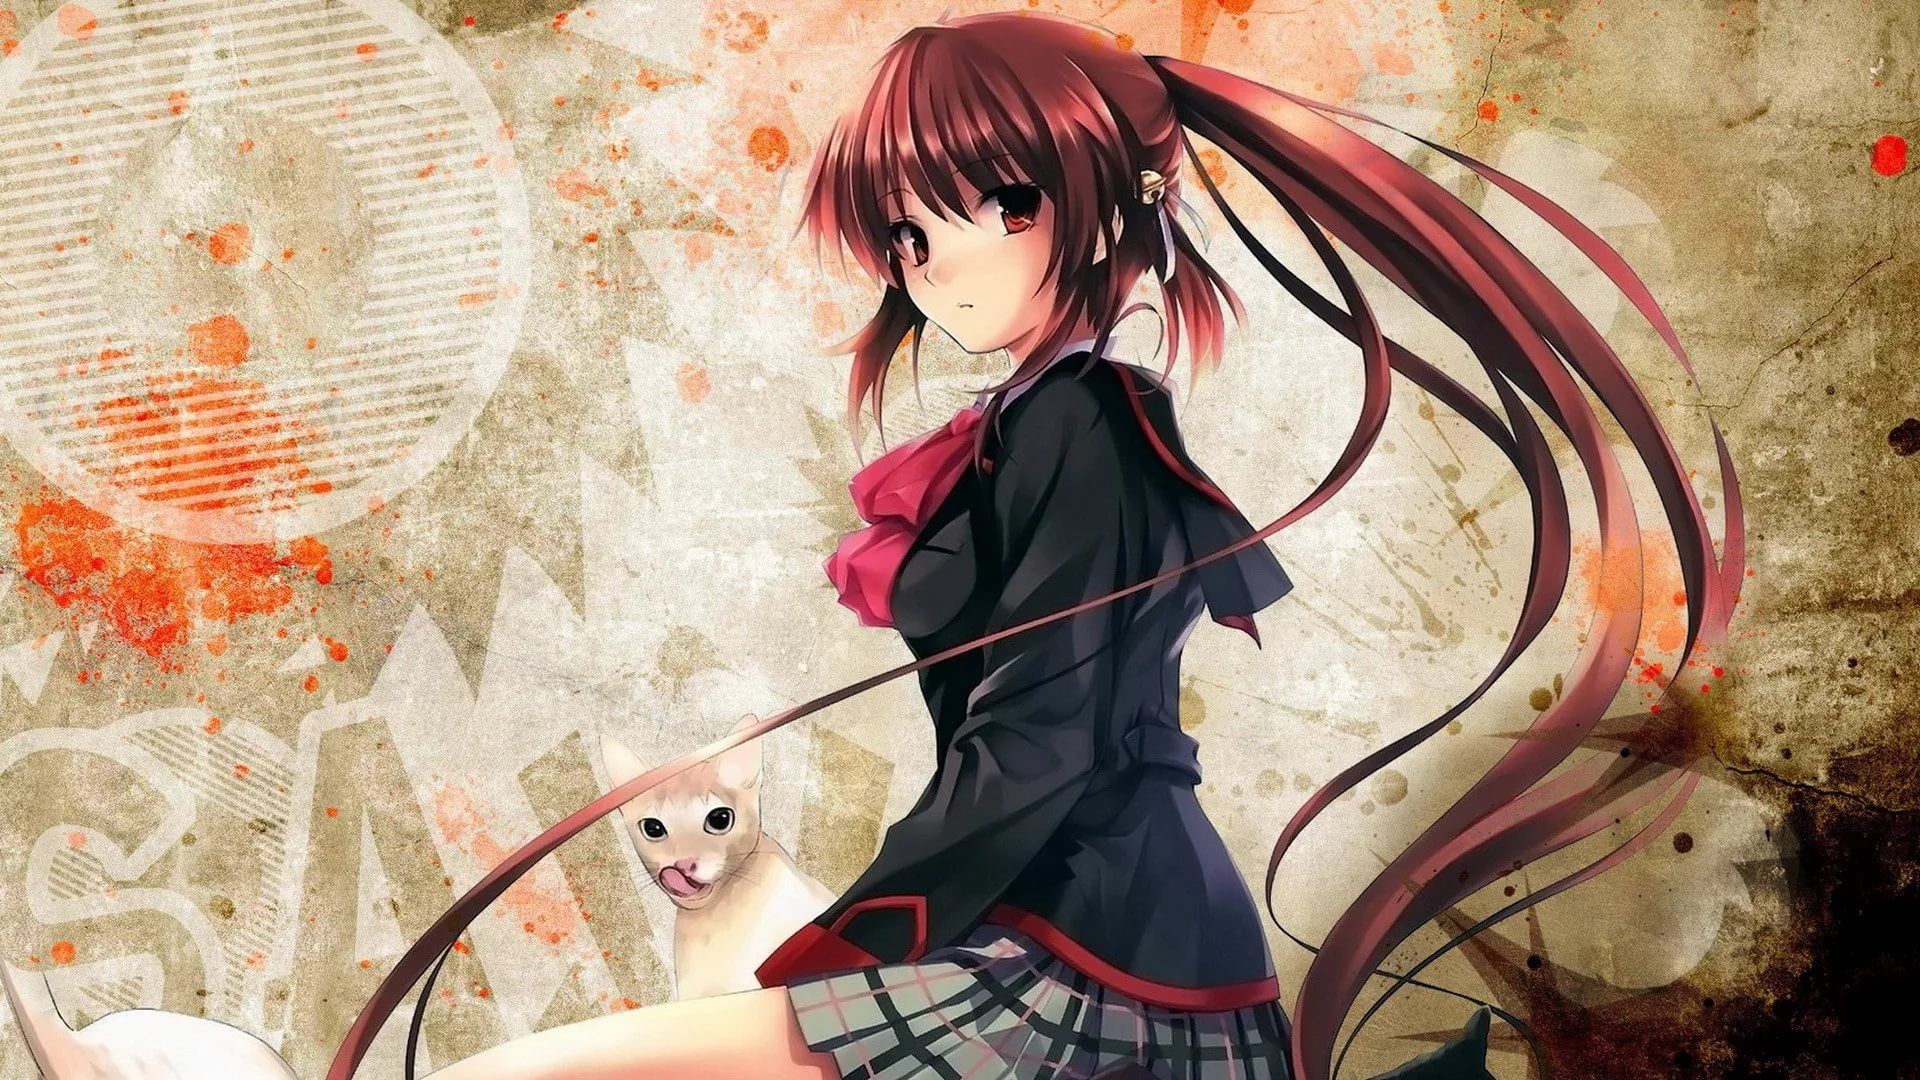 Cute Anime Hd Wallpaper Download - Anime Girl With Cat - HD Wallpaper 